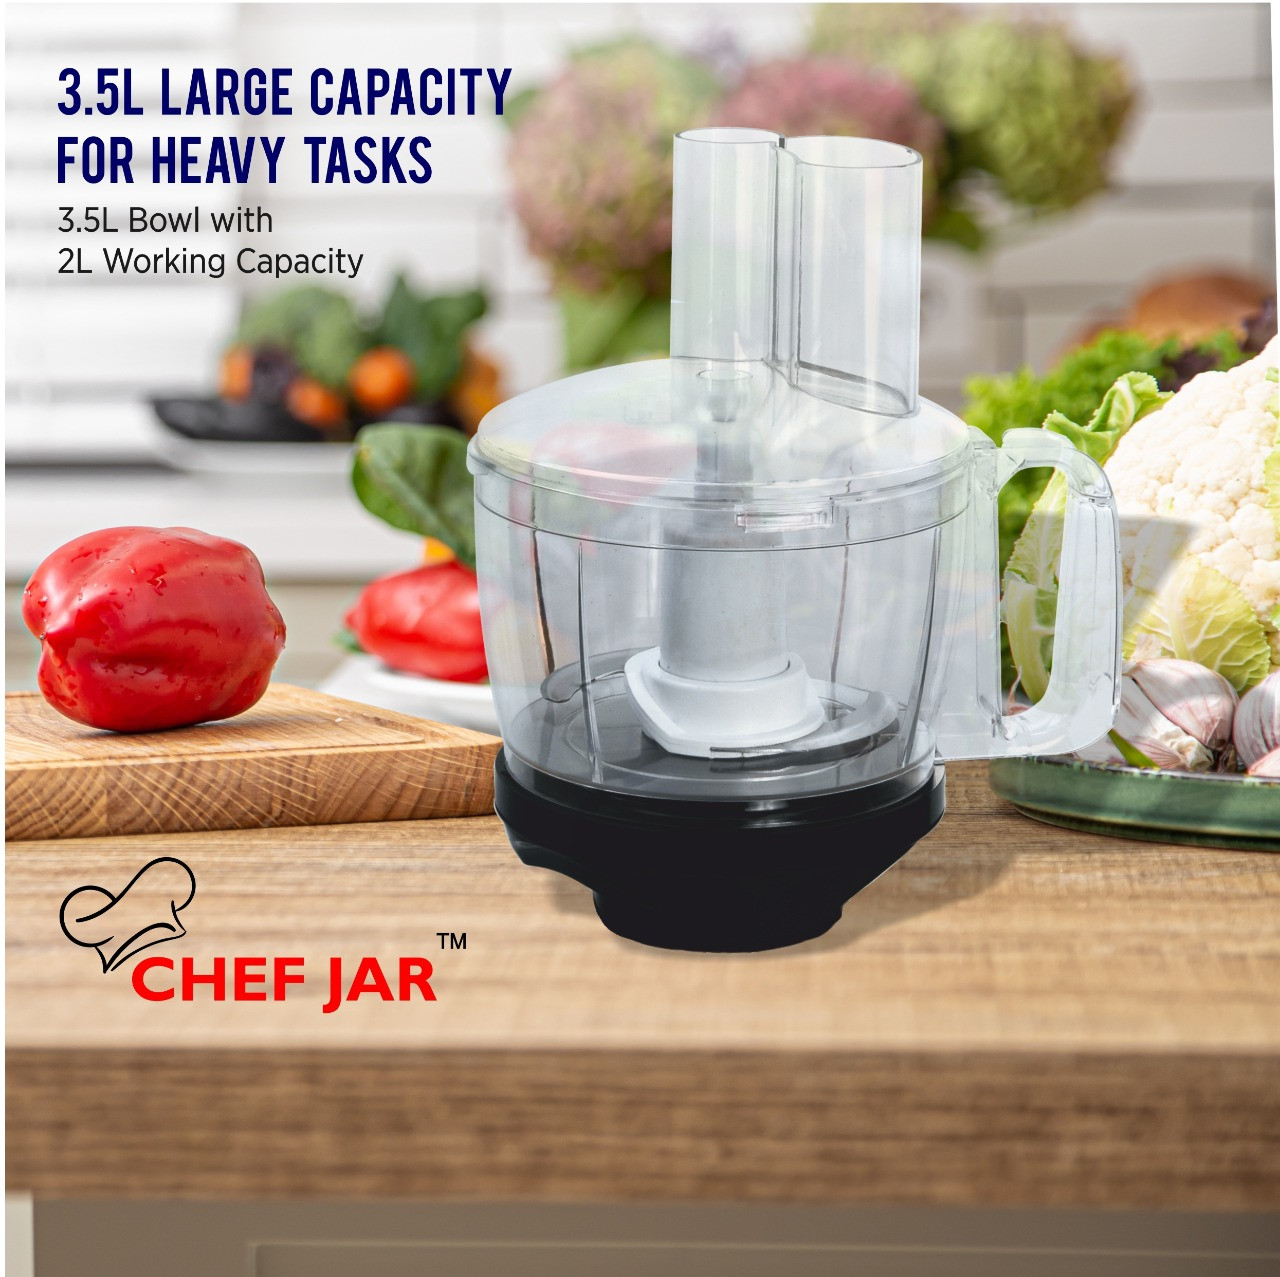 chef-jar-all-in-one-a-complete-food-processor-attachment-for-most-indian-mixer-grinders-compatible-with-all-preethi-premier-models-except-preethi-steele3